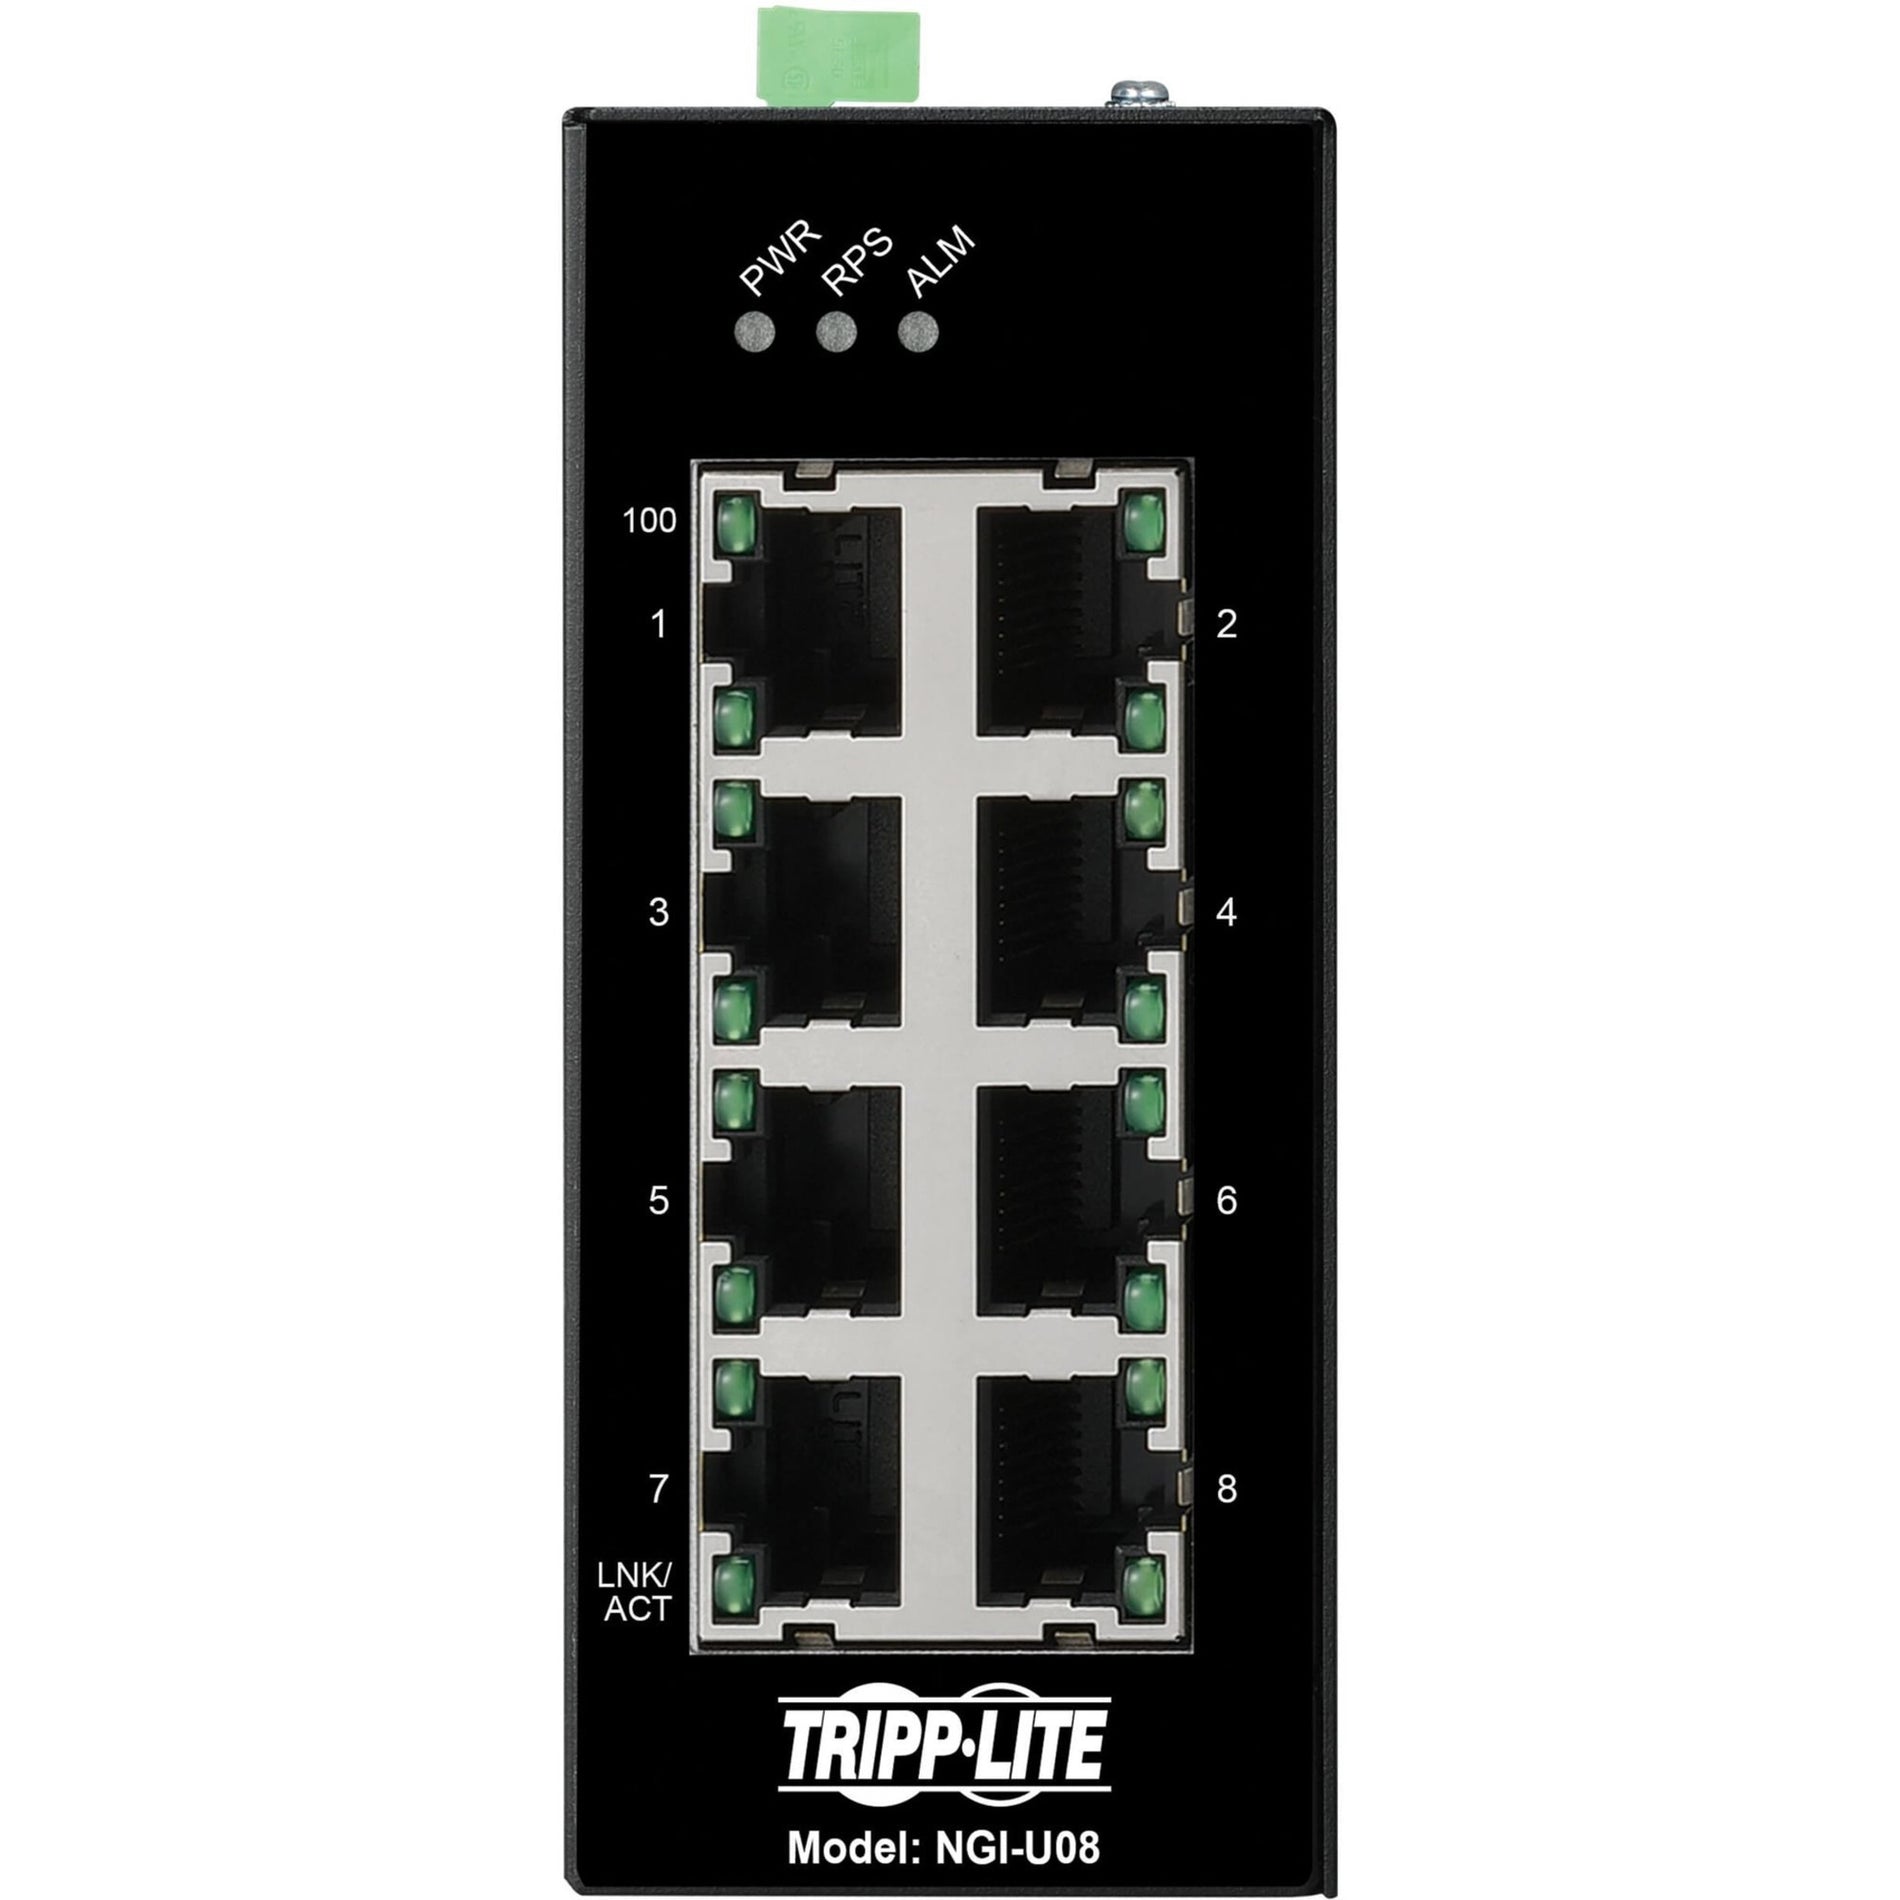 Tripp Lite NGI-U08 Ethernet Switch, Unmanaged 8-Port Industrial 10/100/1000 Mbps DIN, TAA Compliant